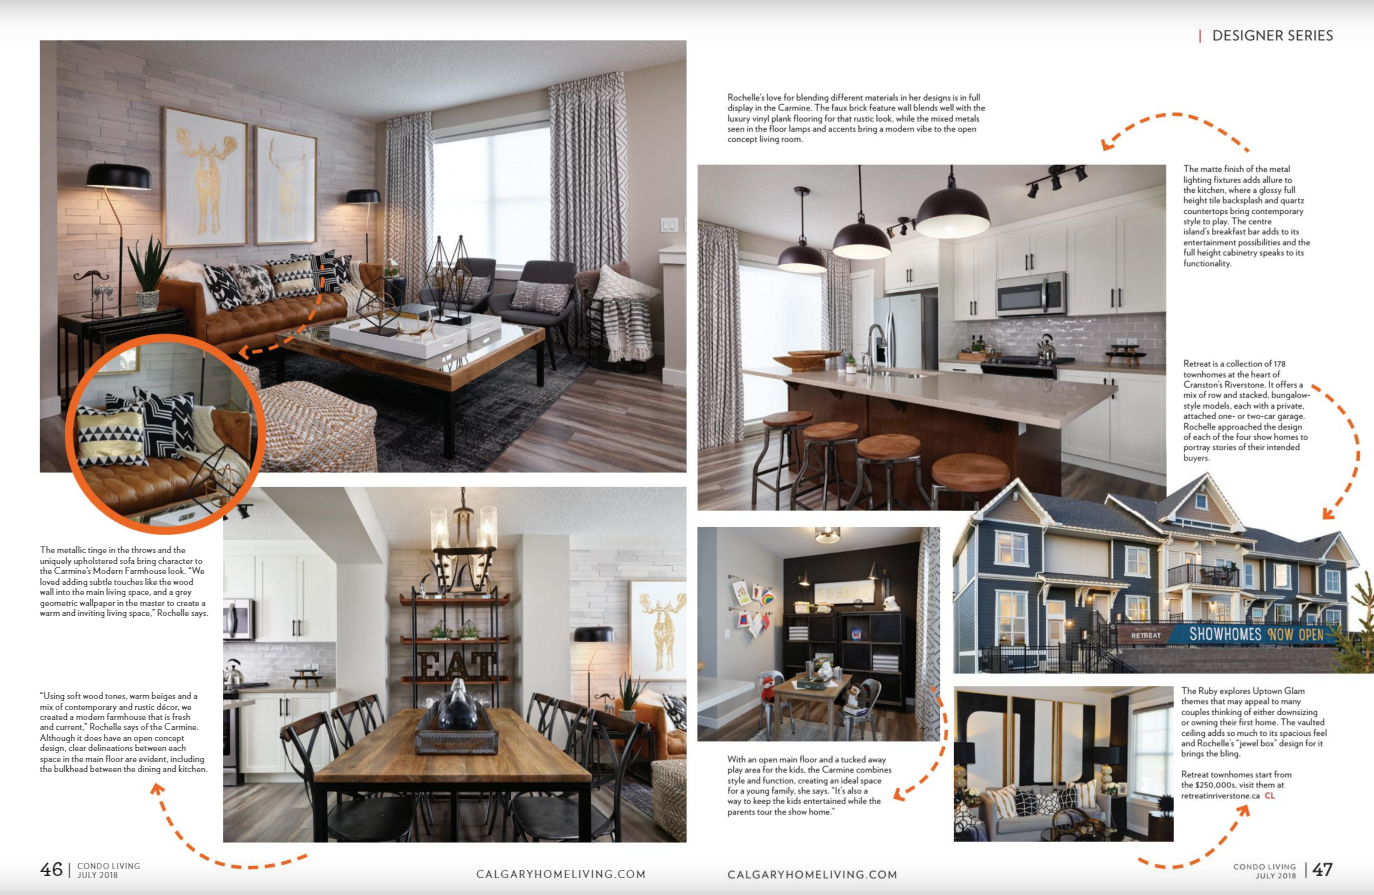 Condo Living - July Issue - 'An Eye For Style'